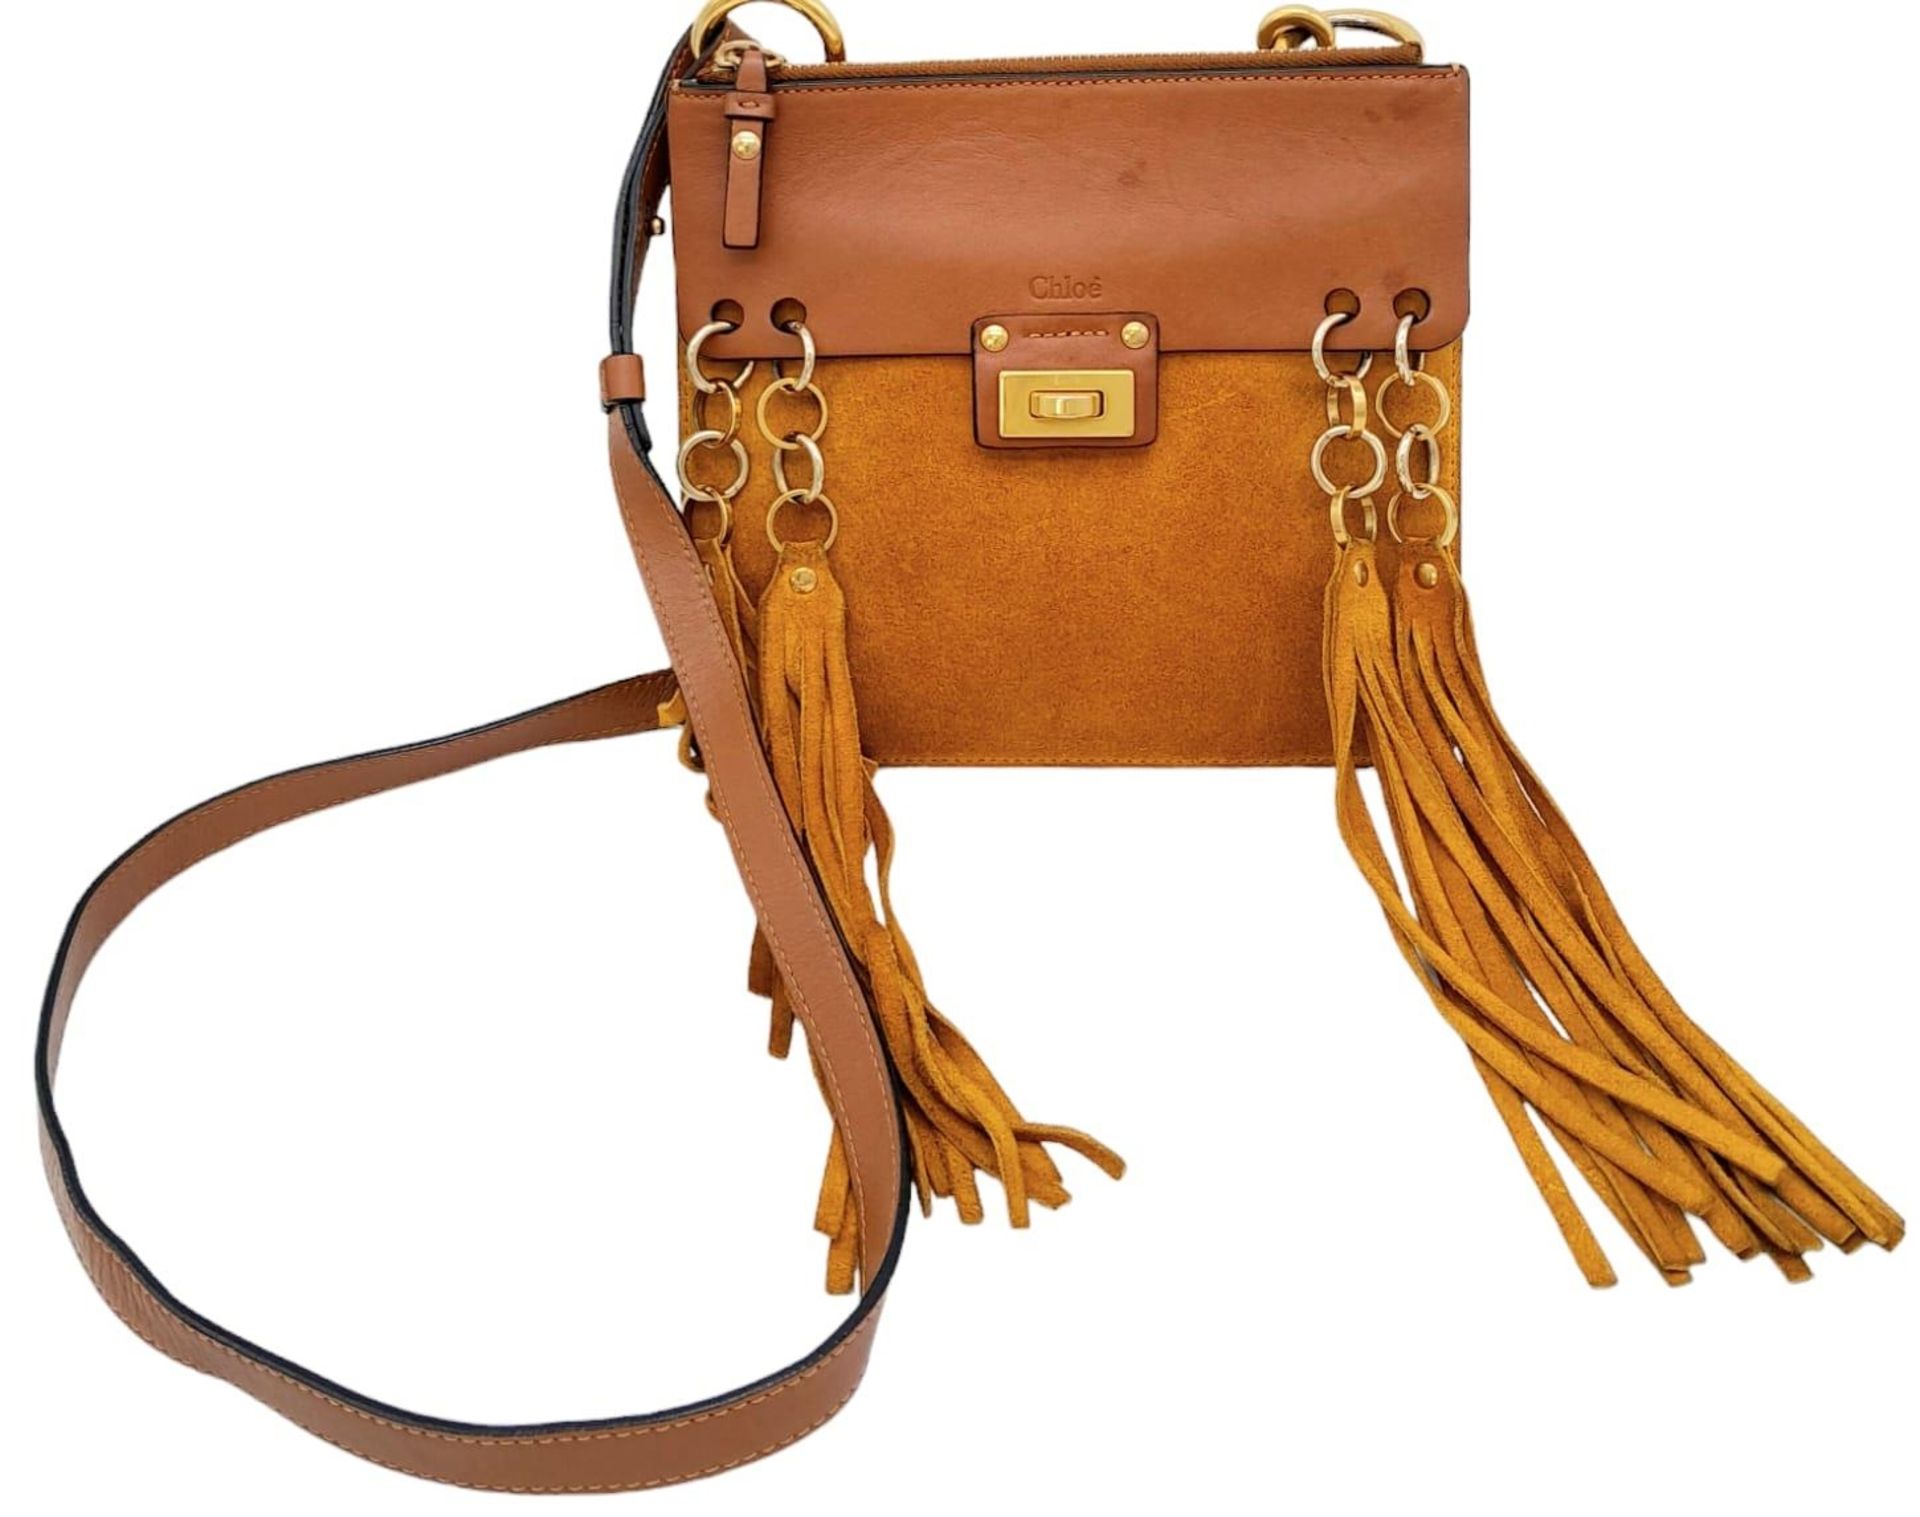 A Chloe Brown and Mustard 'Jane' Shoulder Bag. Leather and suede exterior with gold-toned - Bild 2 aus 8